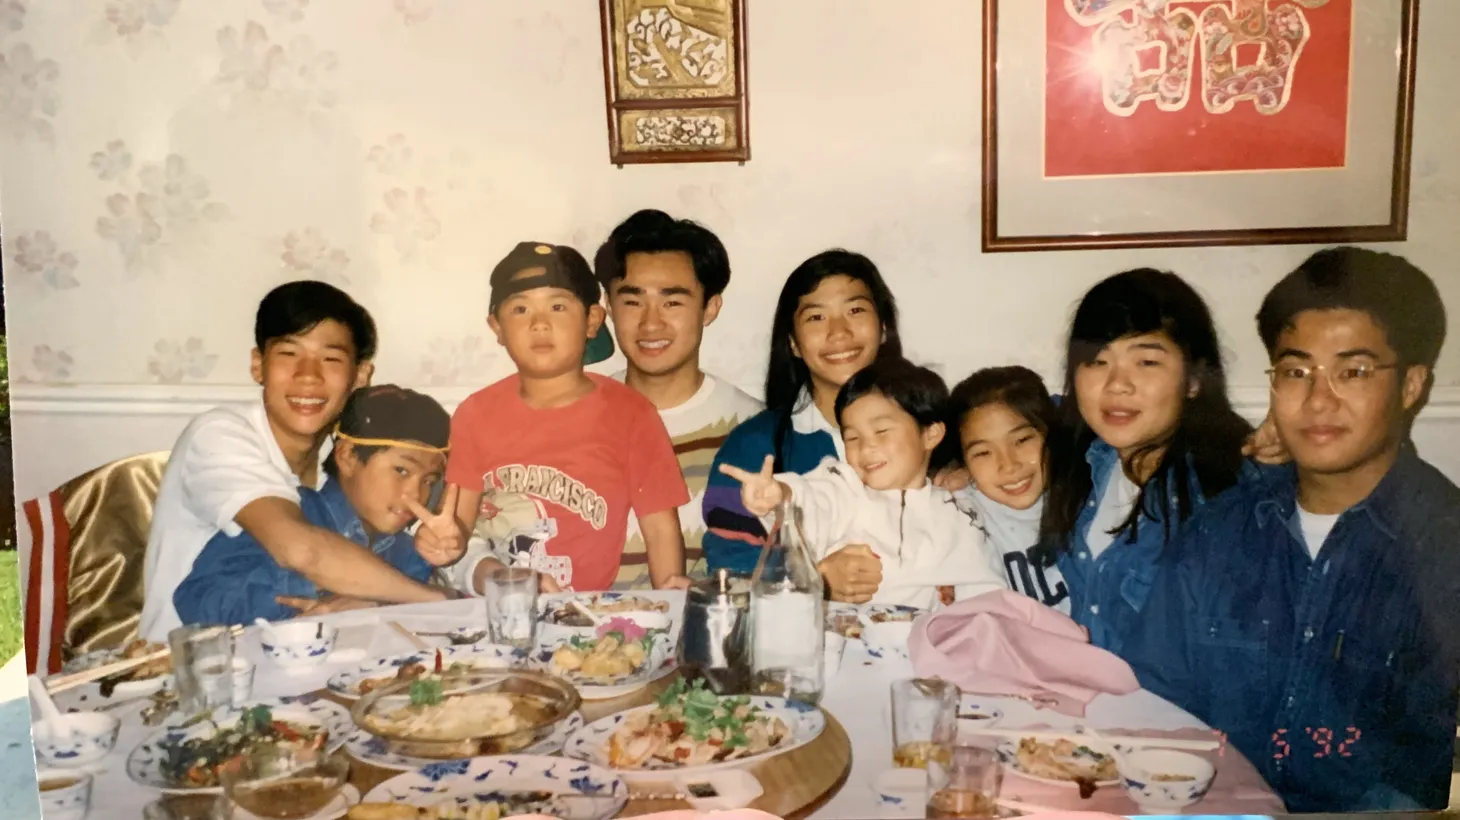 Good Food contributor Kenny Ng (middle, in white) appears with his cousins at Sunday family dinner.